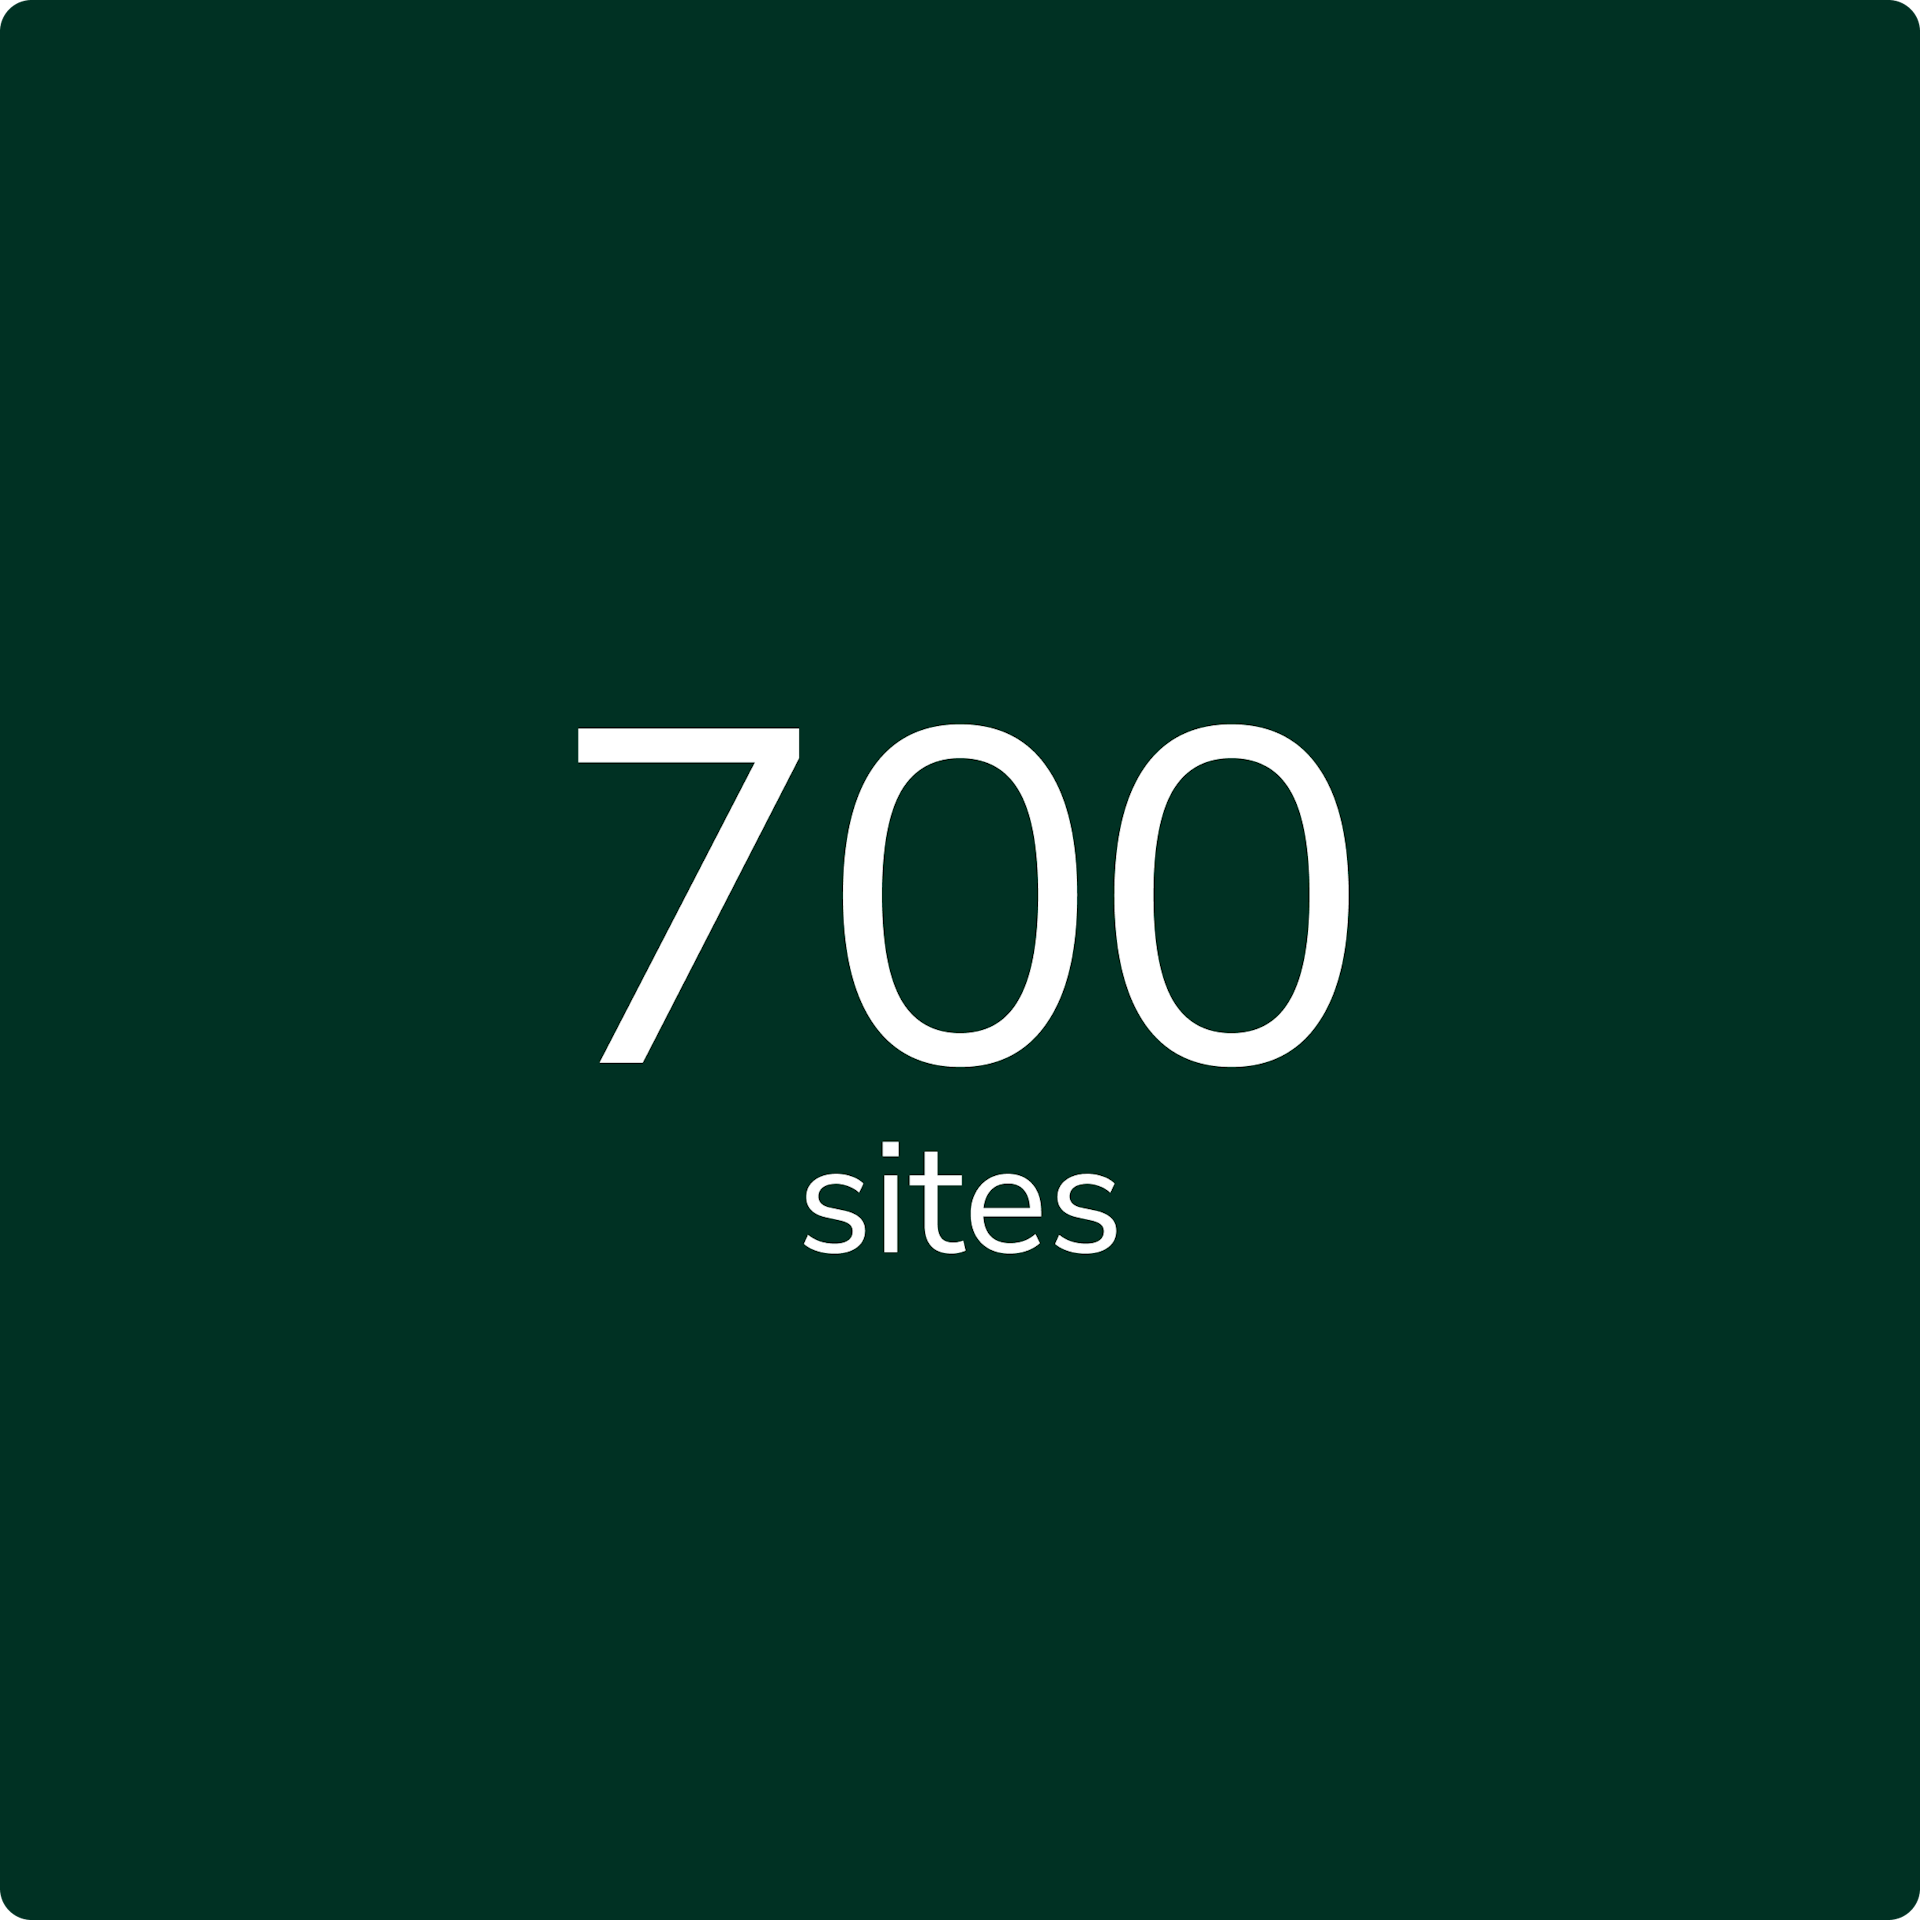 white text reading "700 sites" on a dark green background